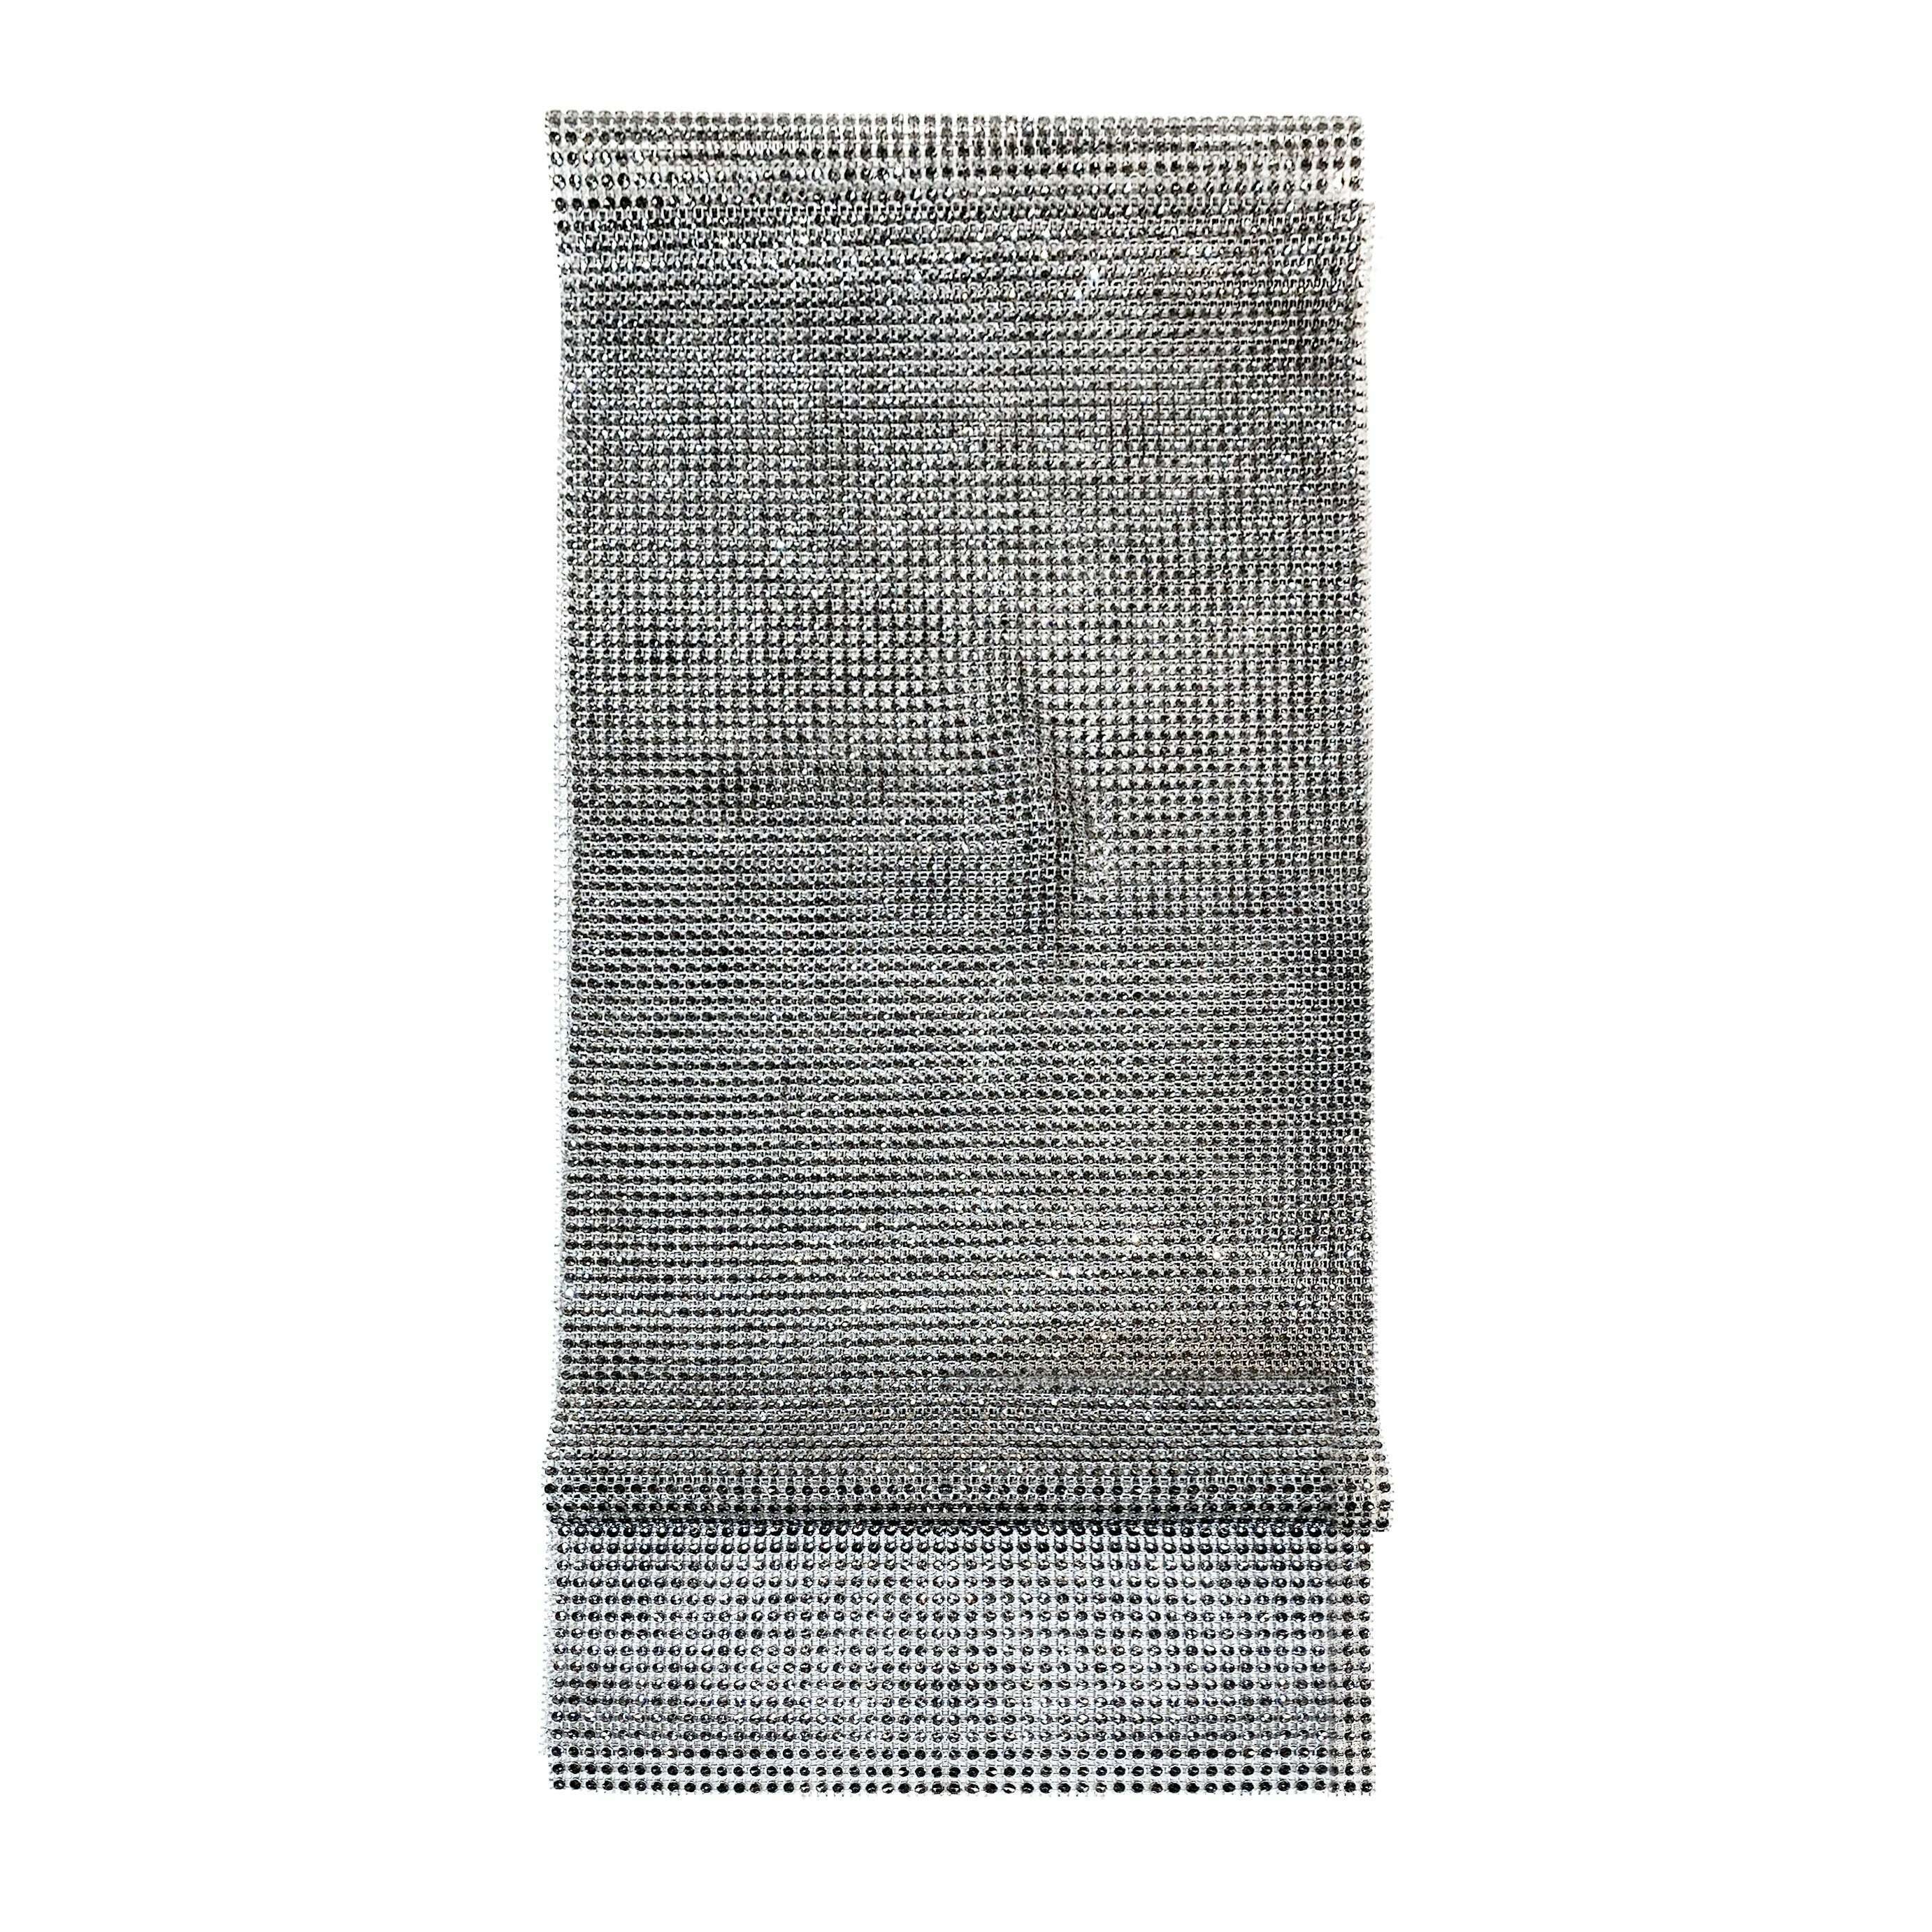 Impodimo Living & Giving:Luxe Diamonte Table Runner - Dark Silver:Swing Gifts